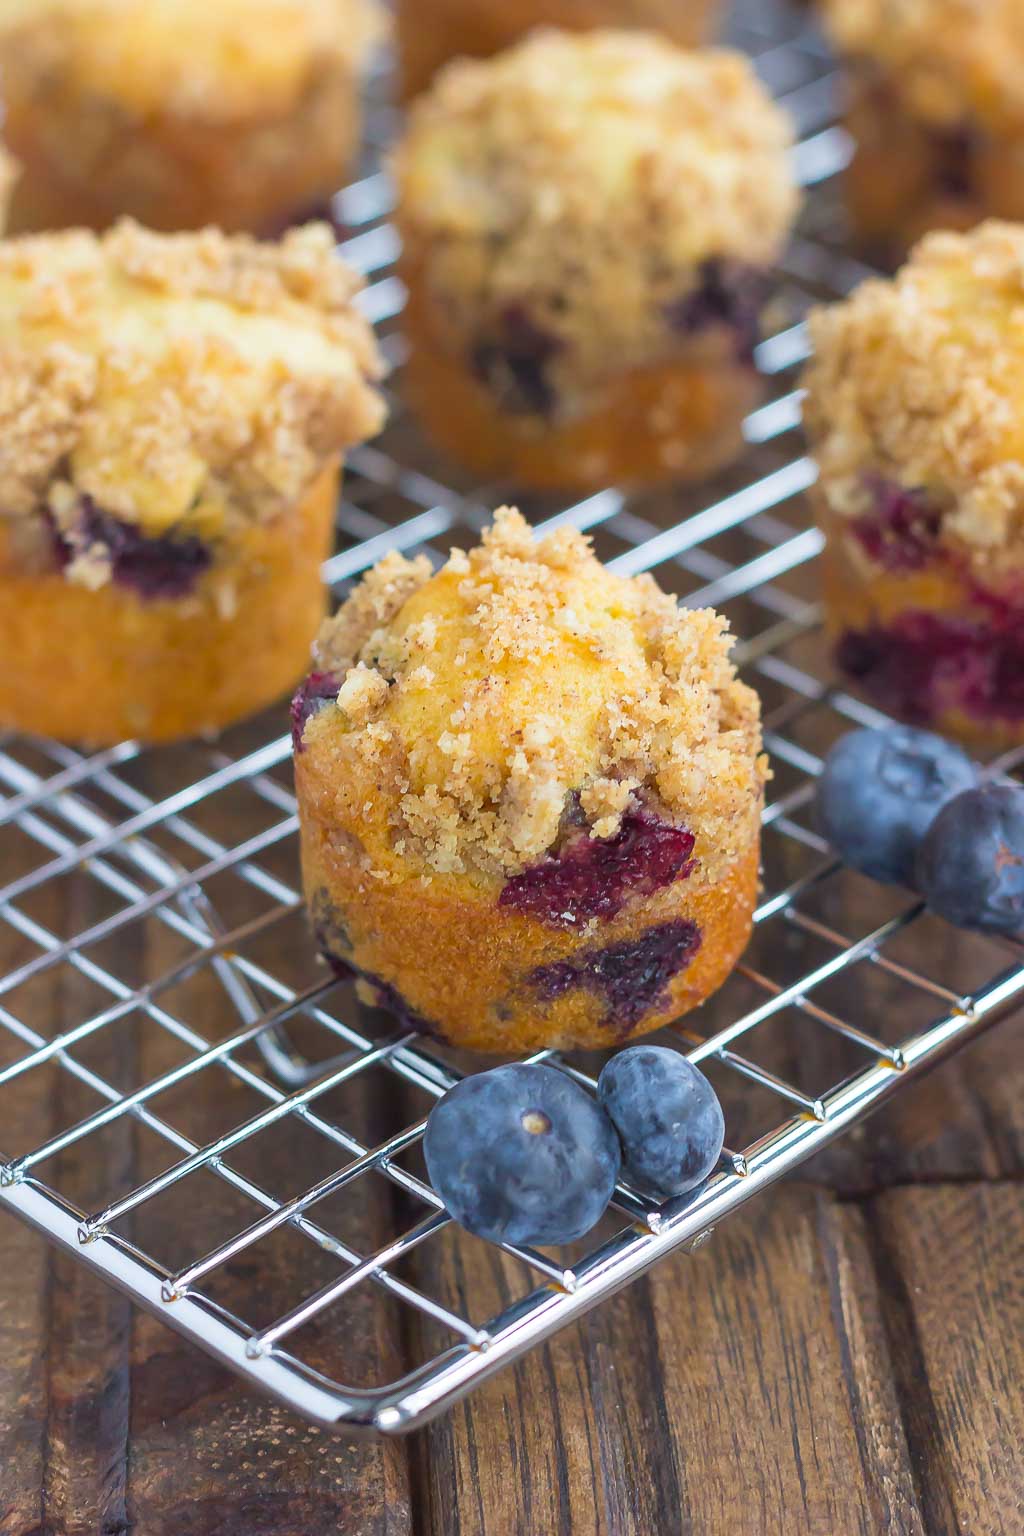 These Blueberry Coffee Cake Bites make the best breakfast or dessert. Loaded with juicy blueberries, topped with a cinnamon crumble, and baked to perfection, these mini bites are fun to make and even better to eat!